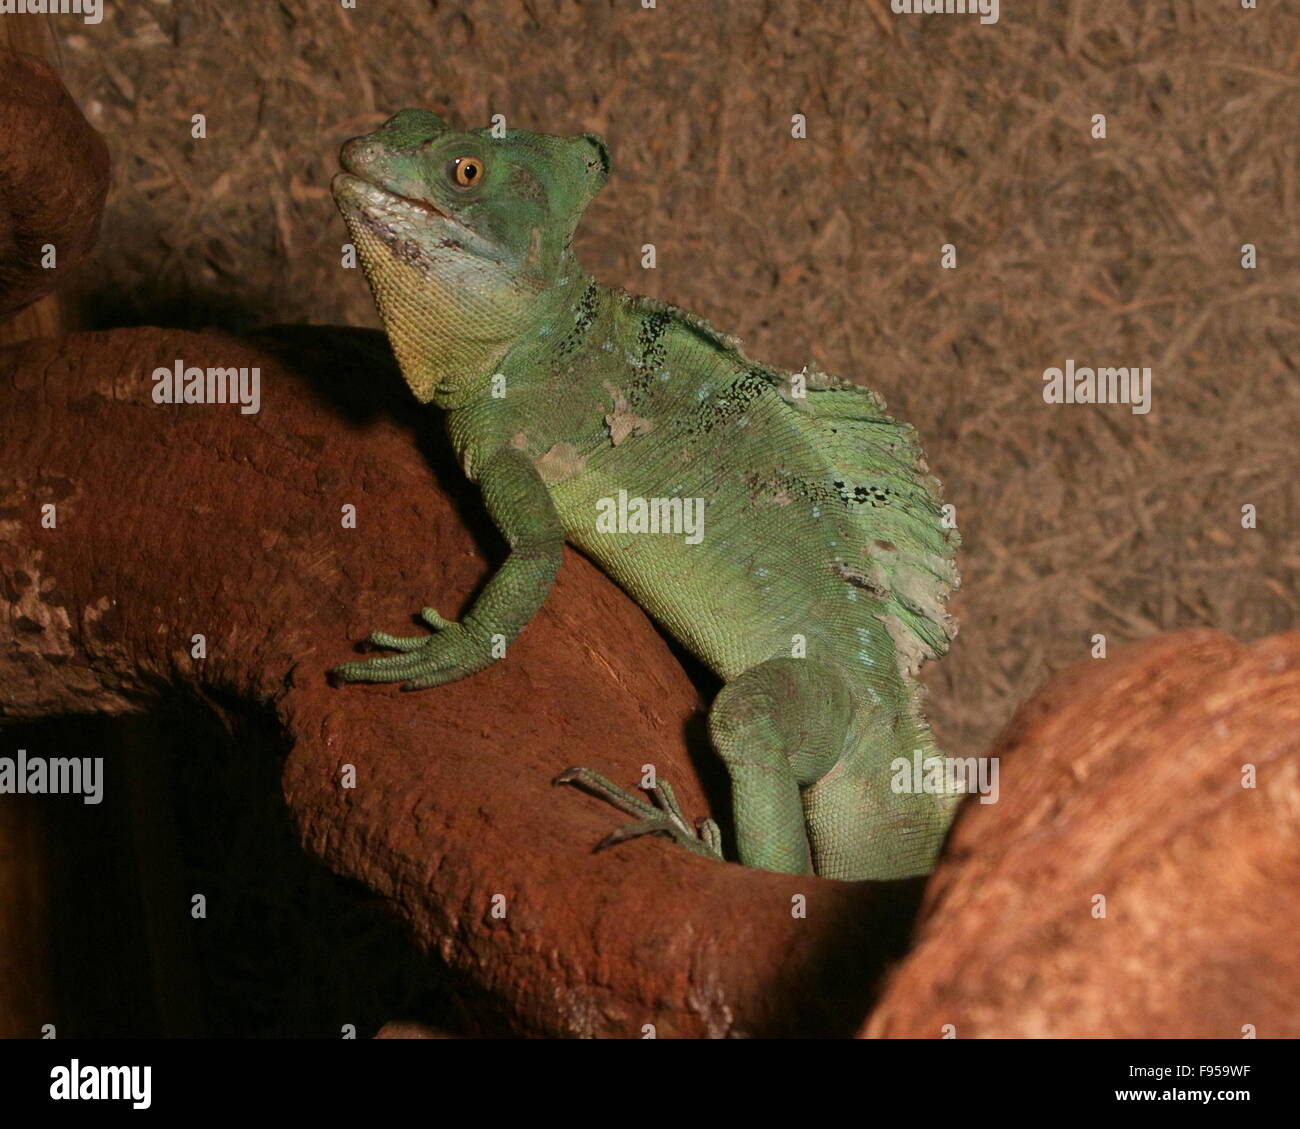 Male Central American Green or Plumed basilisk (Basiliscus plumifrons), a.k.a. double crested basilisk or  Jesus Christ Lizard Stock Photo